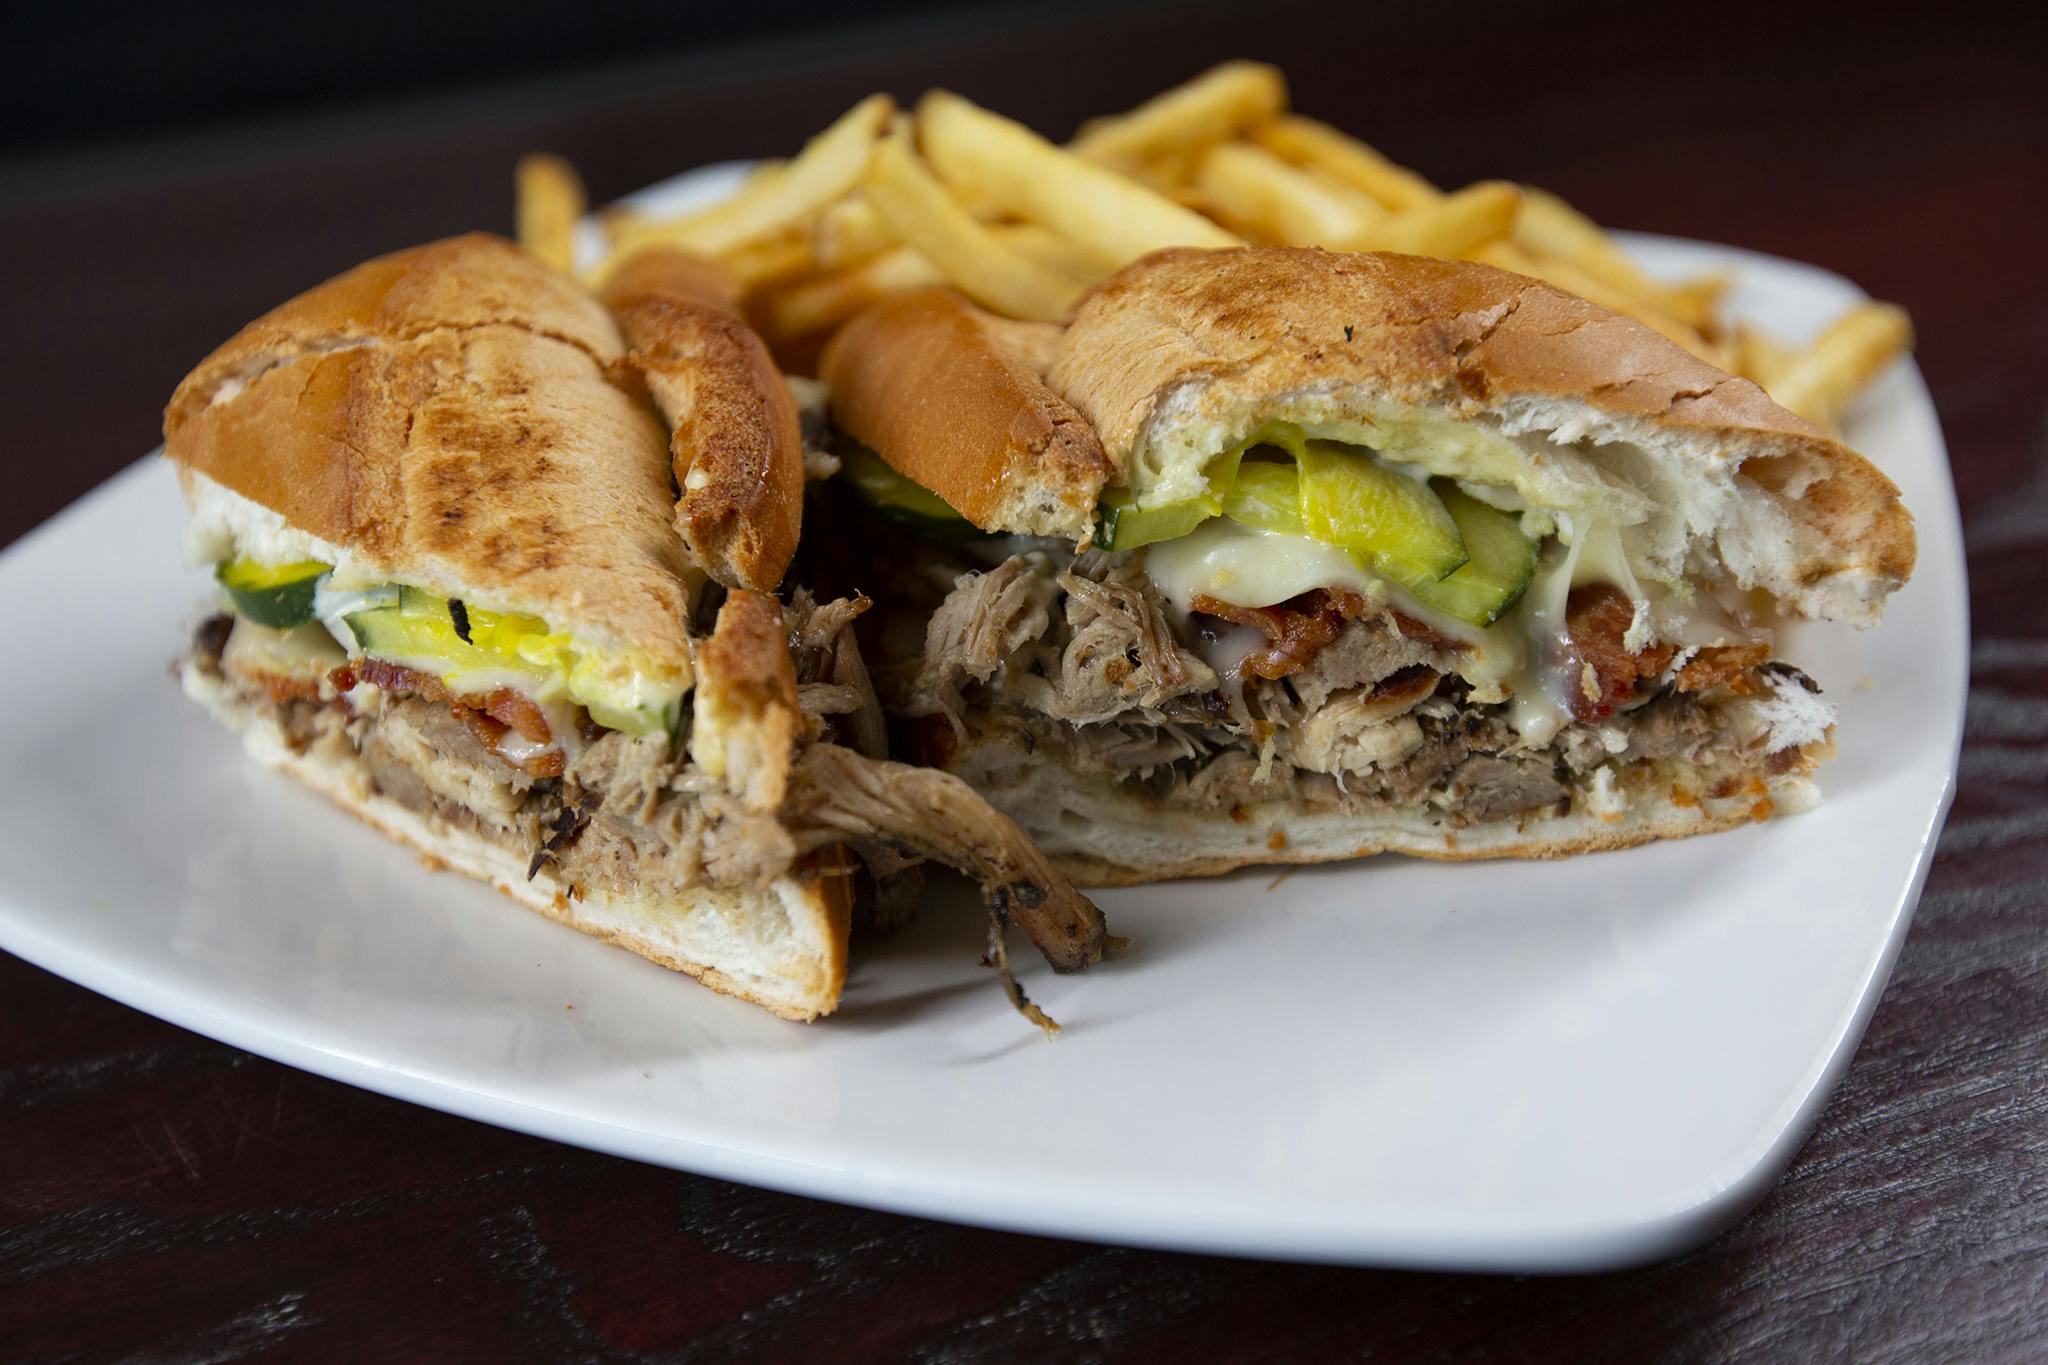 Cubano Sandwich from Firehouse Grill - Chicago Ave in Evanston, IL